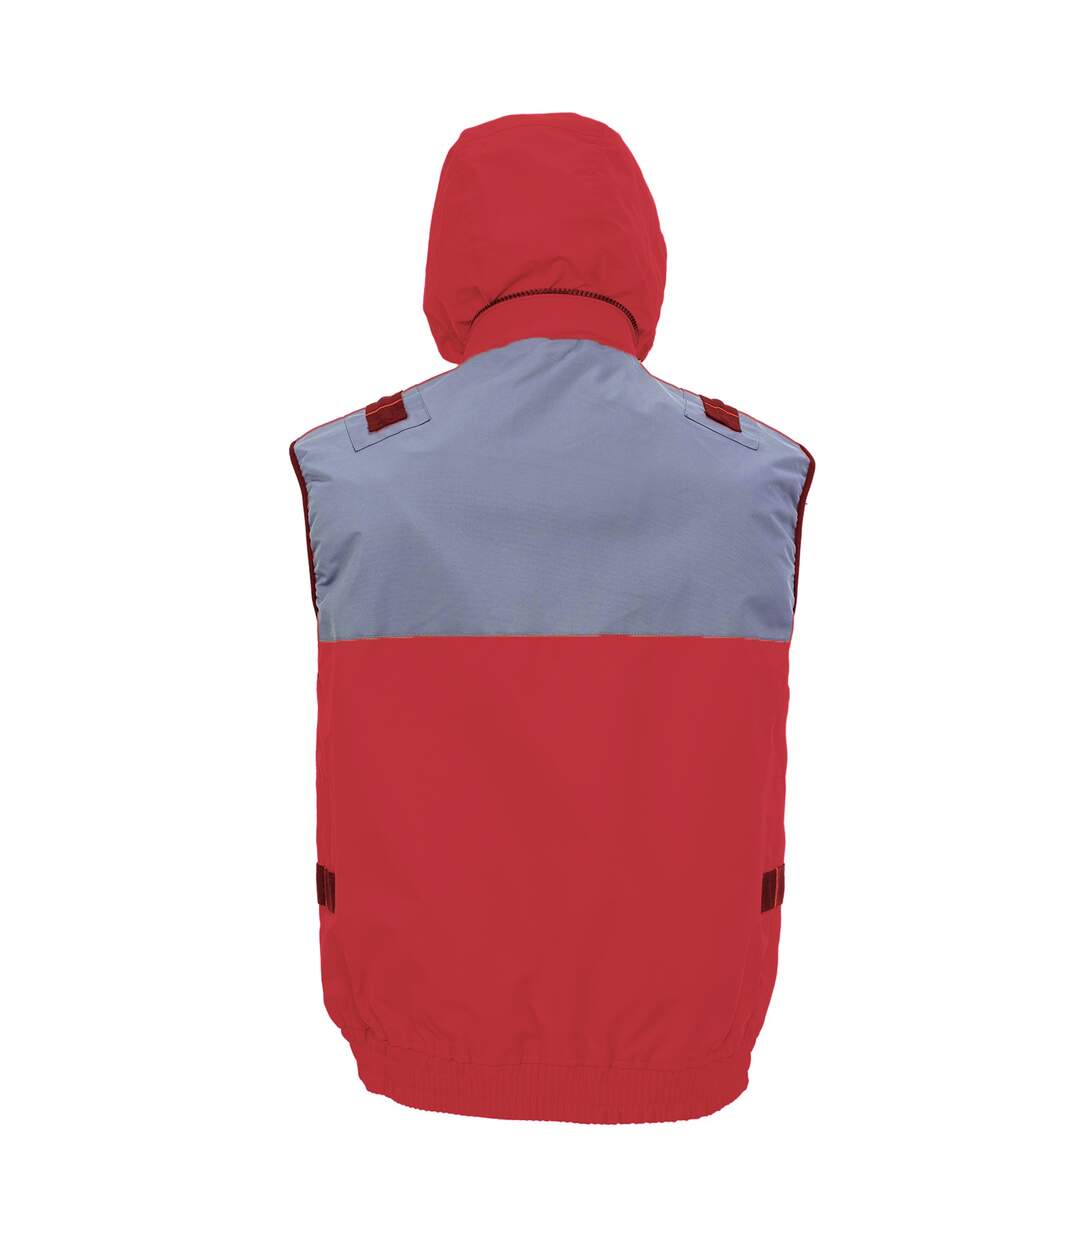 Result Work-Guard Mens X-Over Sleeveless Gilet (Red/Grey)